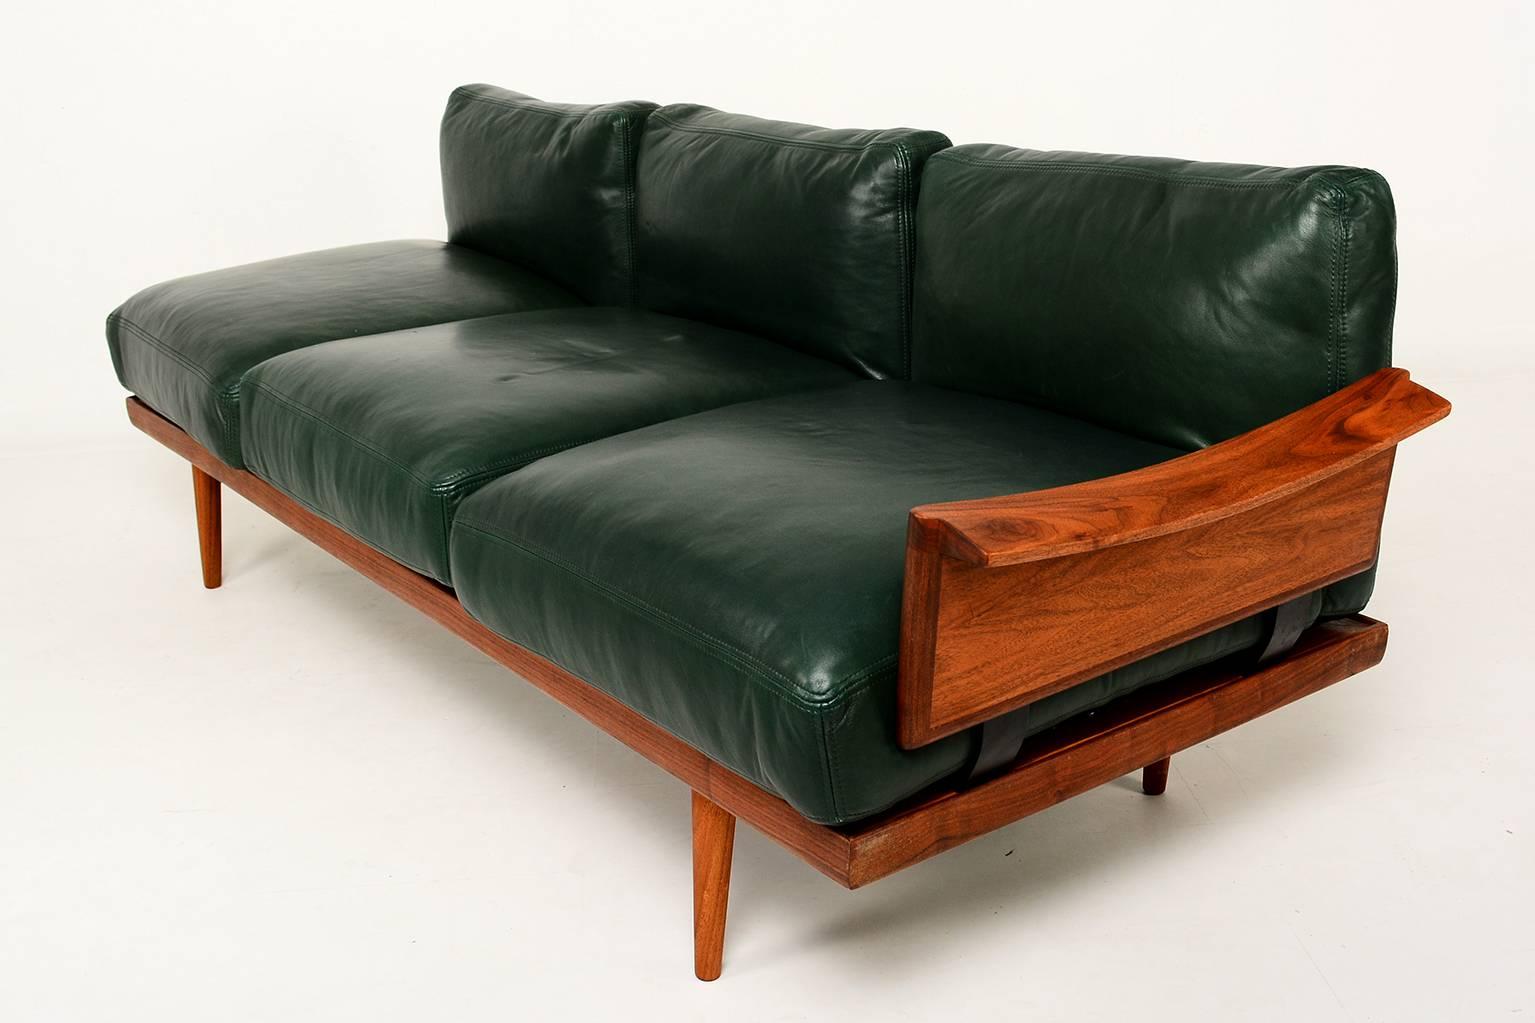 For your consideration a vintage Scandinavian sofa set fully restored in excellent condition.

Exotic rosewood frame with some teak sections. New forest green leather cushions. Filled with feather down/mix foam. Very comfortable. 

Sculptural